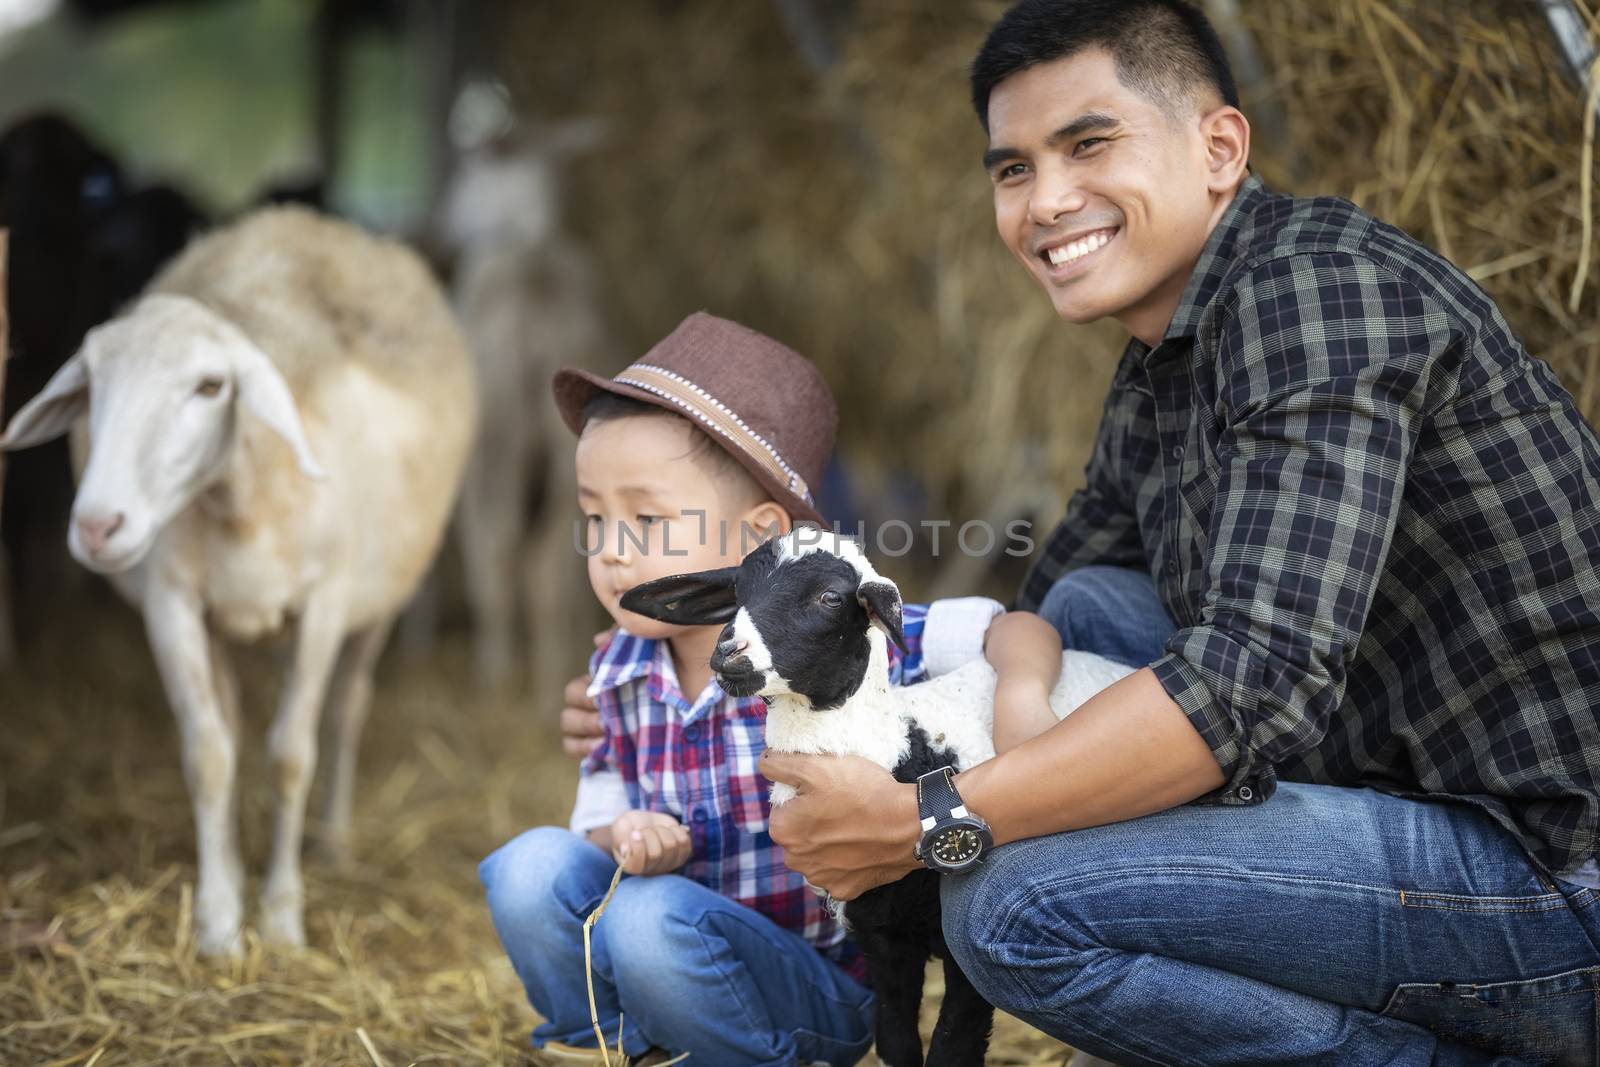 The father and son, the sheep farm owner, hug a small lamb in the embrace with love in their pet.